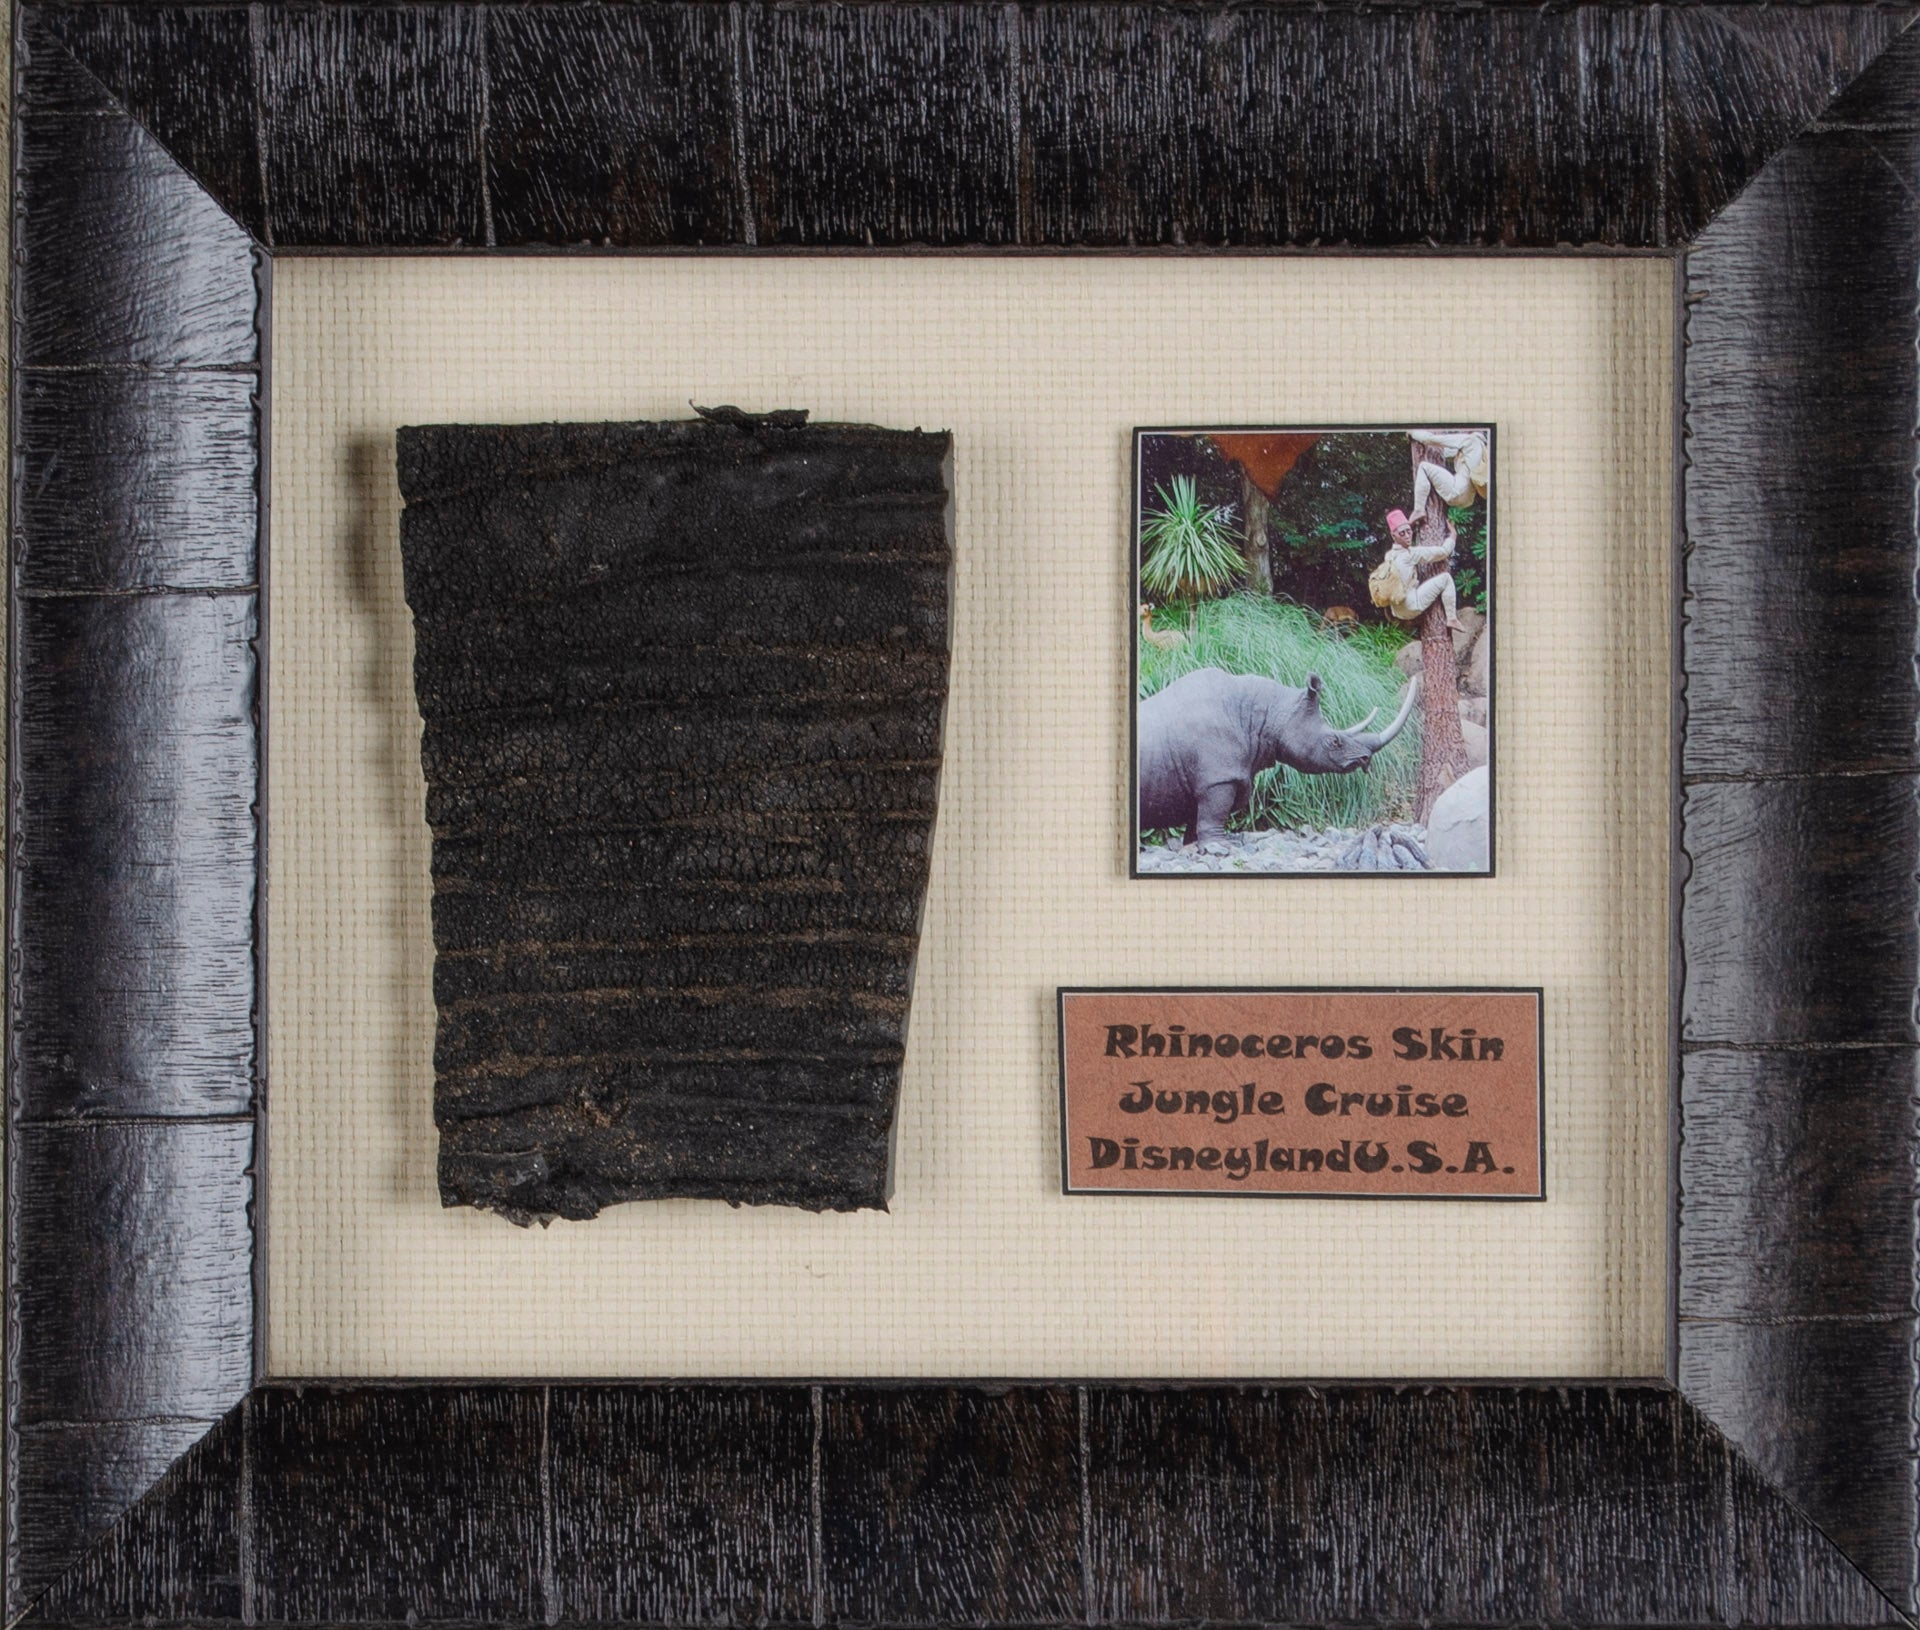 Rhinoceros Skin from the Jungle Cruise Attraction in Disneyland